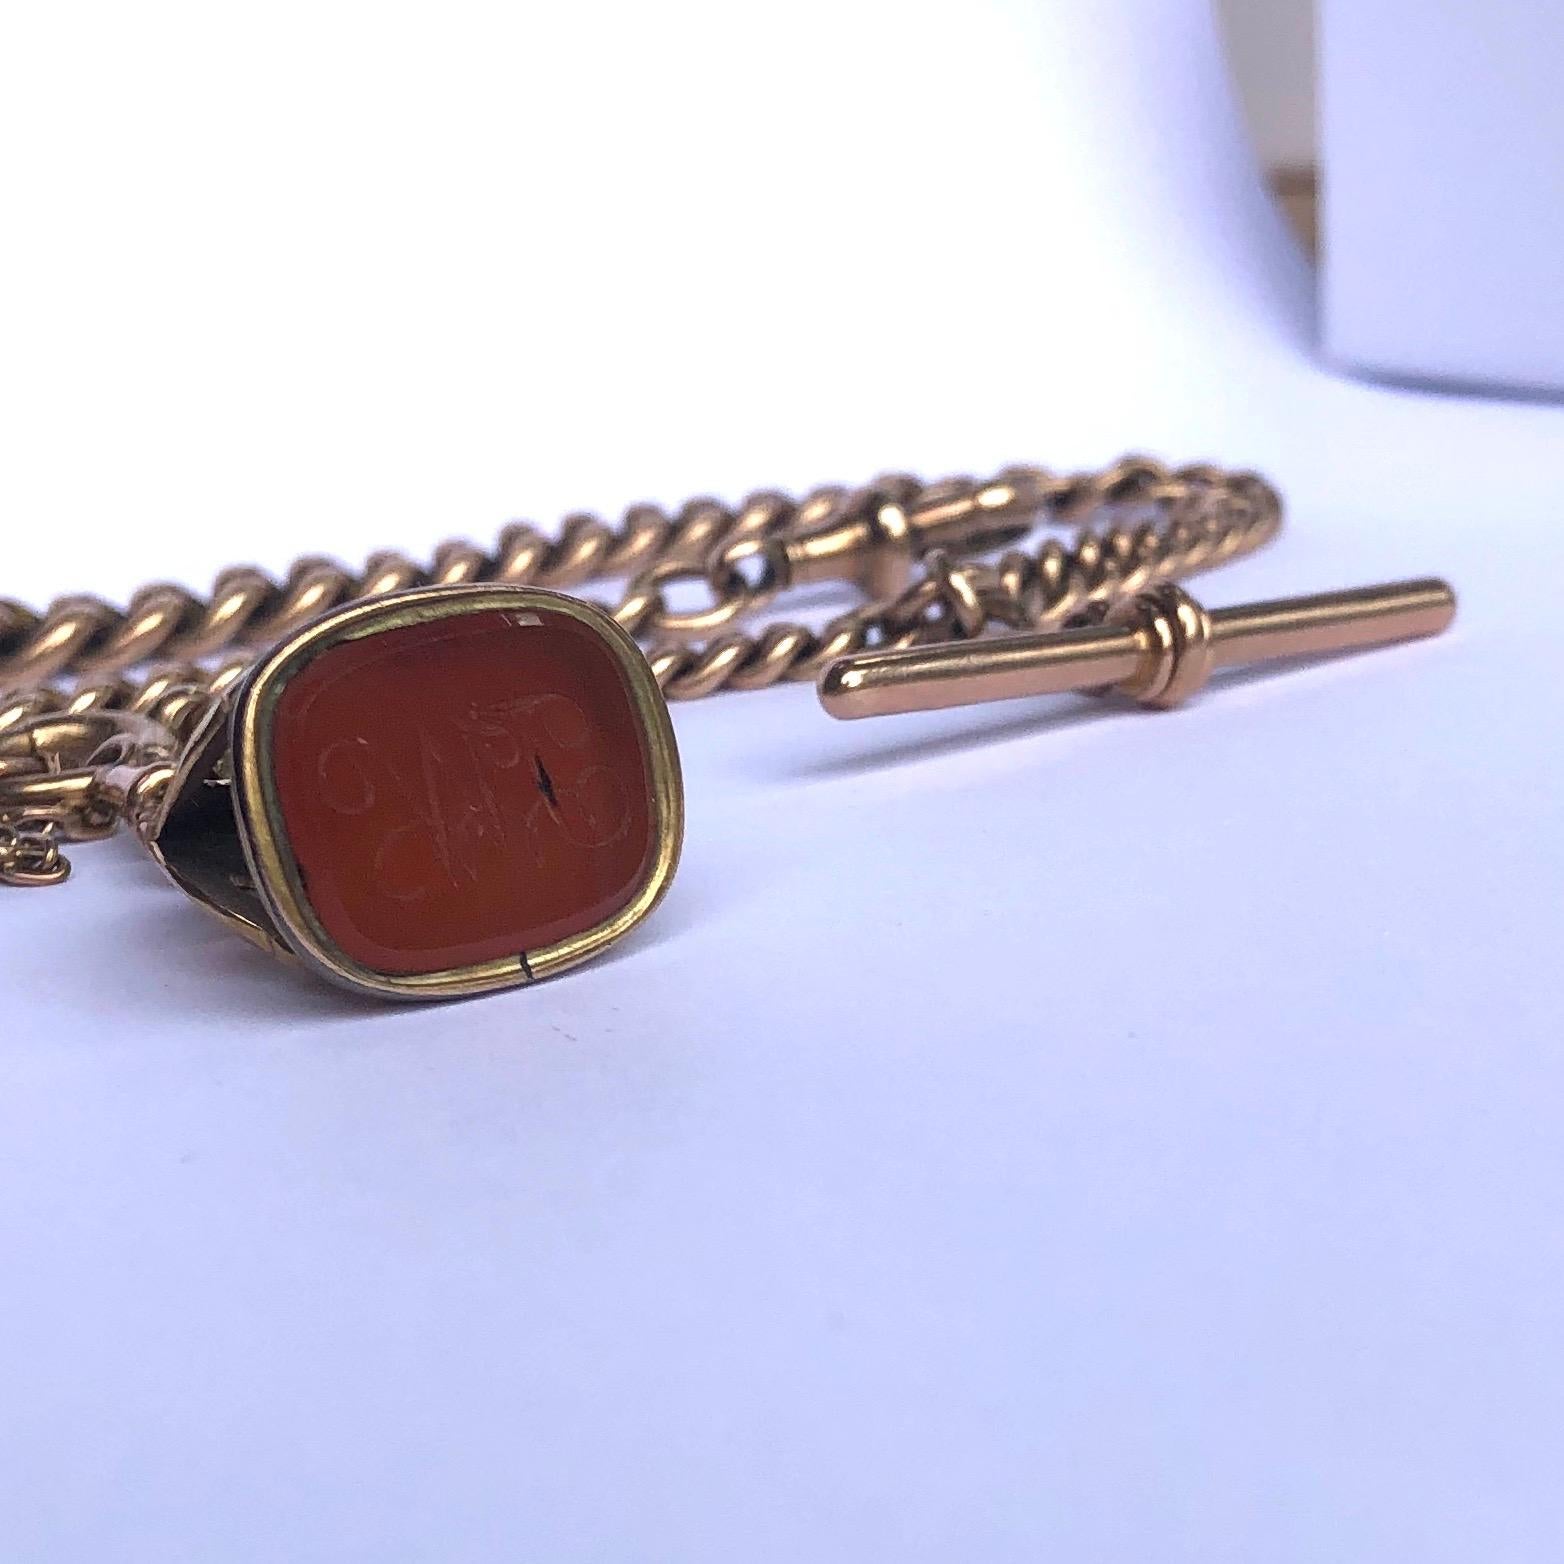 This curb chain is hallmarked on each link and slightly graduates in size starting with the larger links at the centre and smaller on the outside. At one end of the chain is a dog clip and the other has a fob with a carnelian stone engraved with the